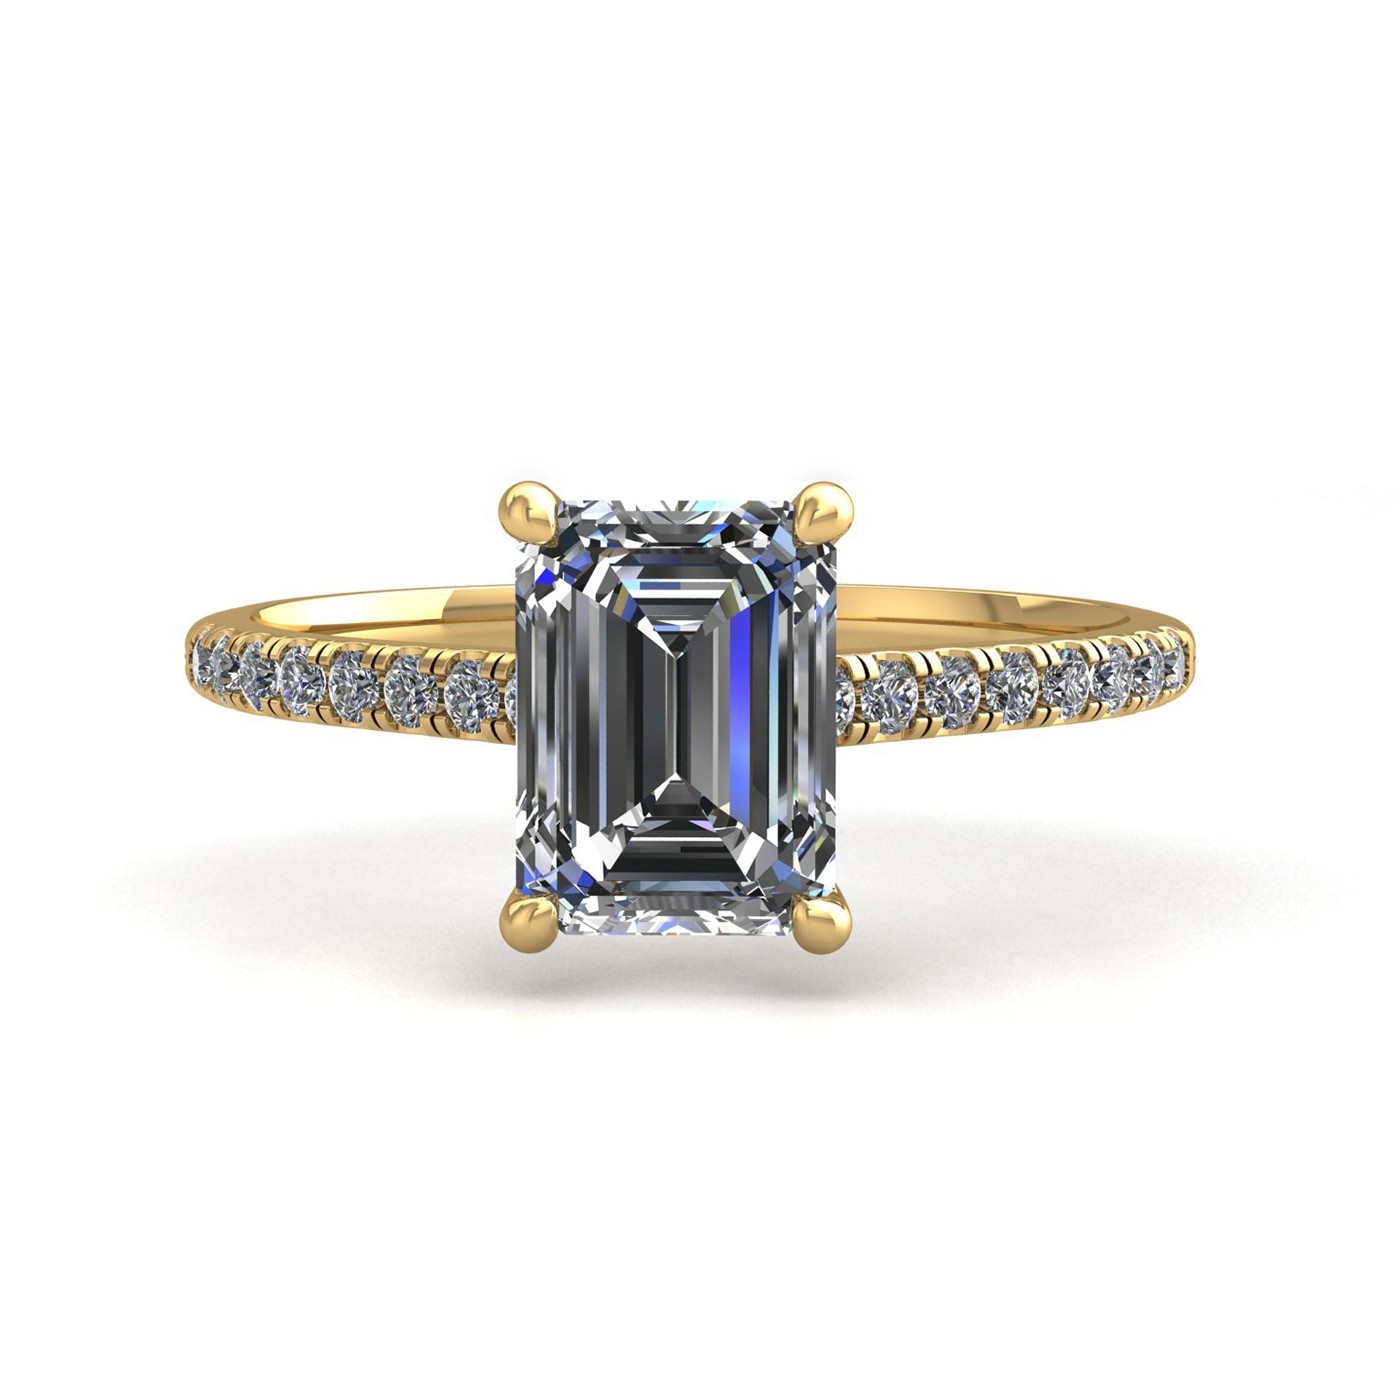 18k yellow gold 1.2ct 4 prongs emerald cut diamond engagement ring with whisper thin pavÉ set band Photos & images